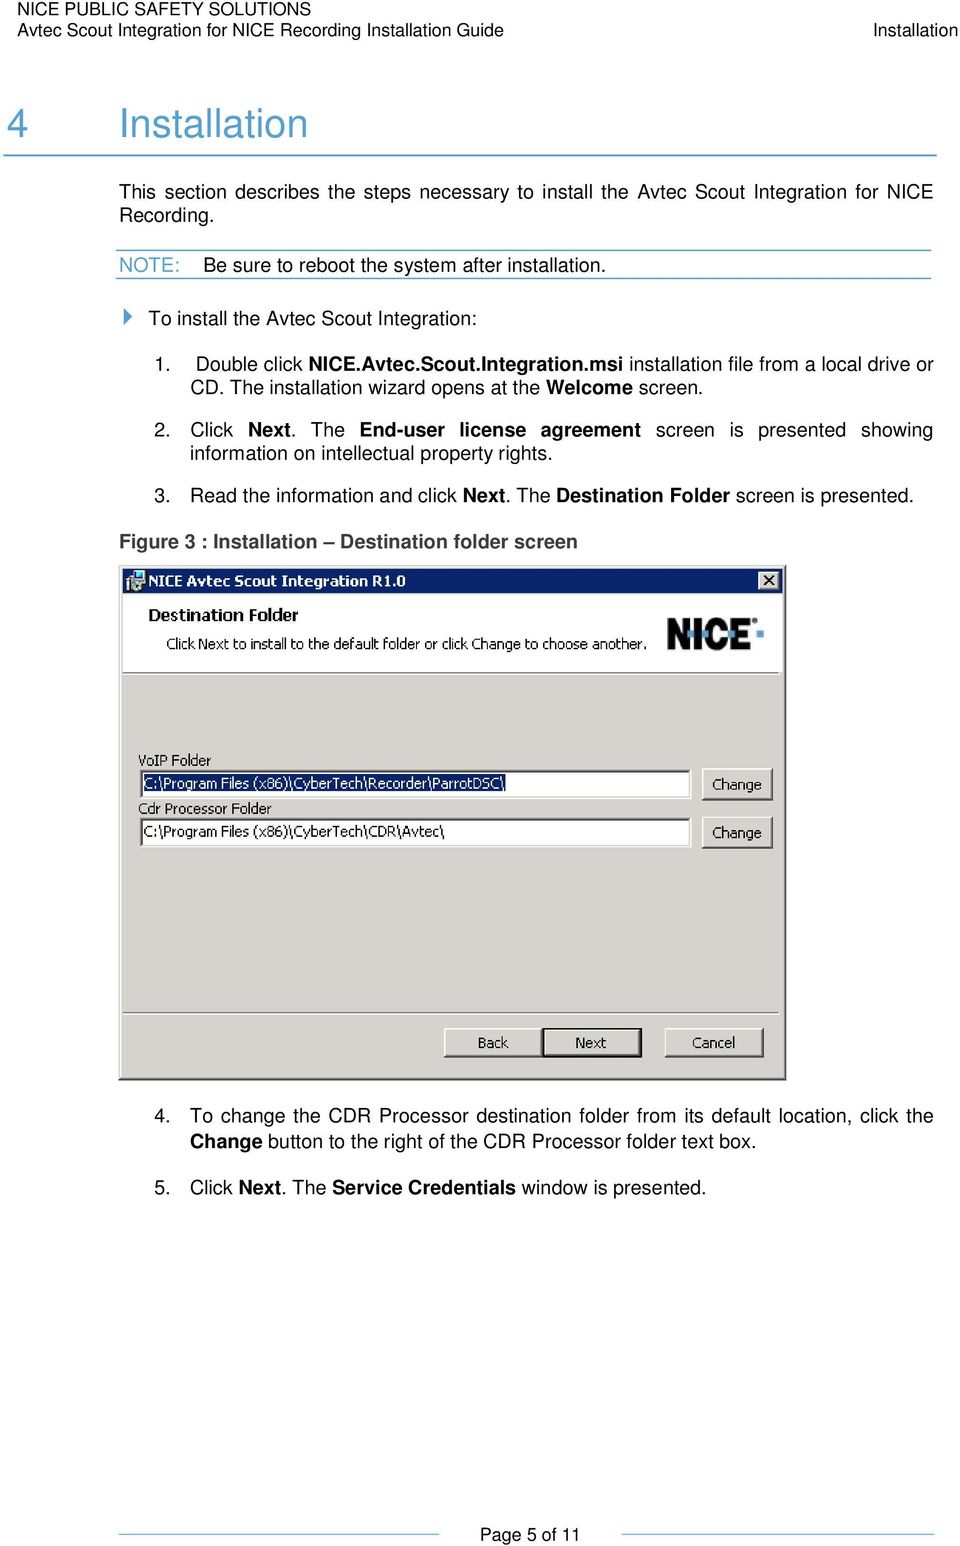 Click Next. The End-user license agreement screen is presented showing information on intellectual property rights. Read the information and click Next. The Destination Folder screen is presented.